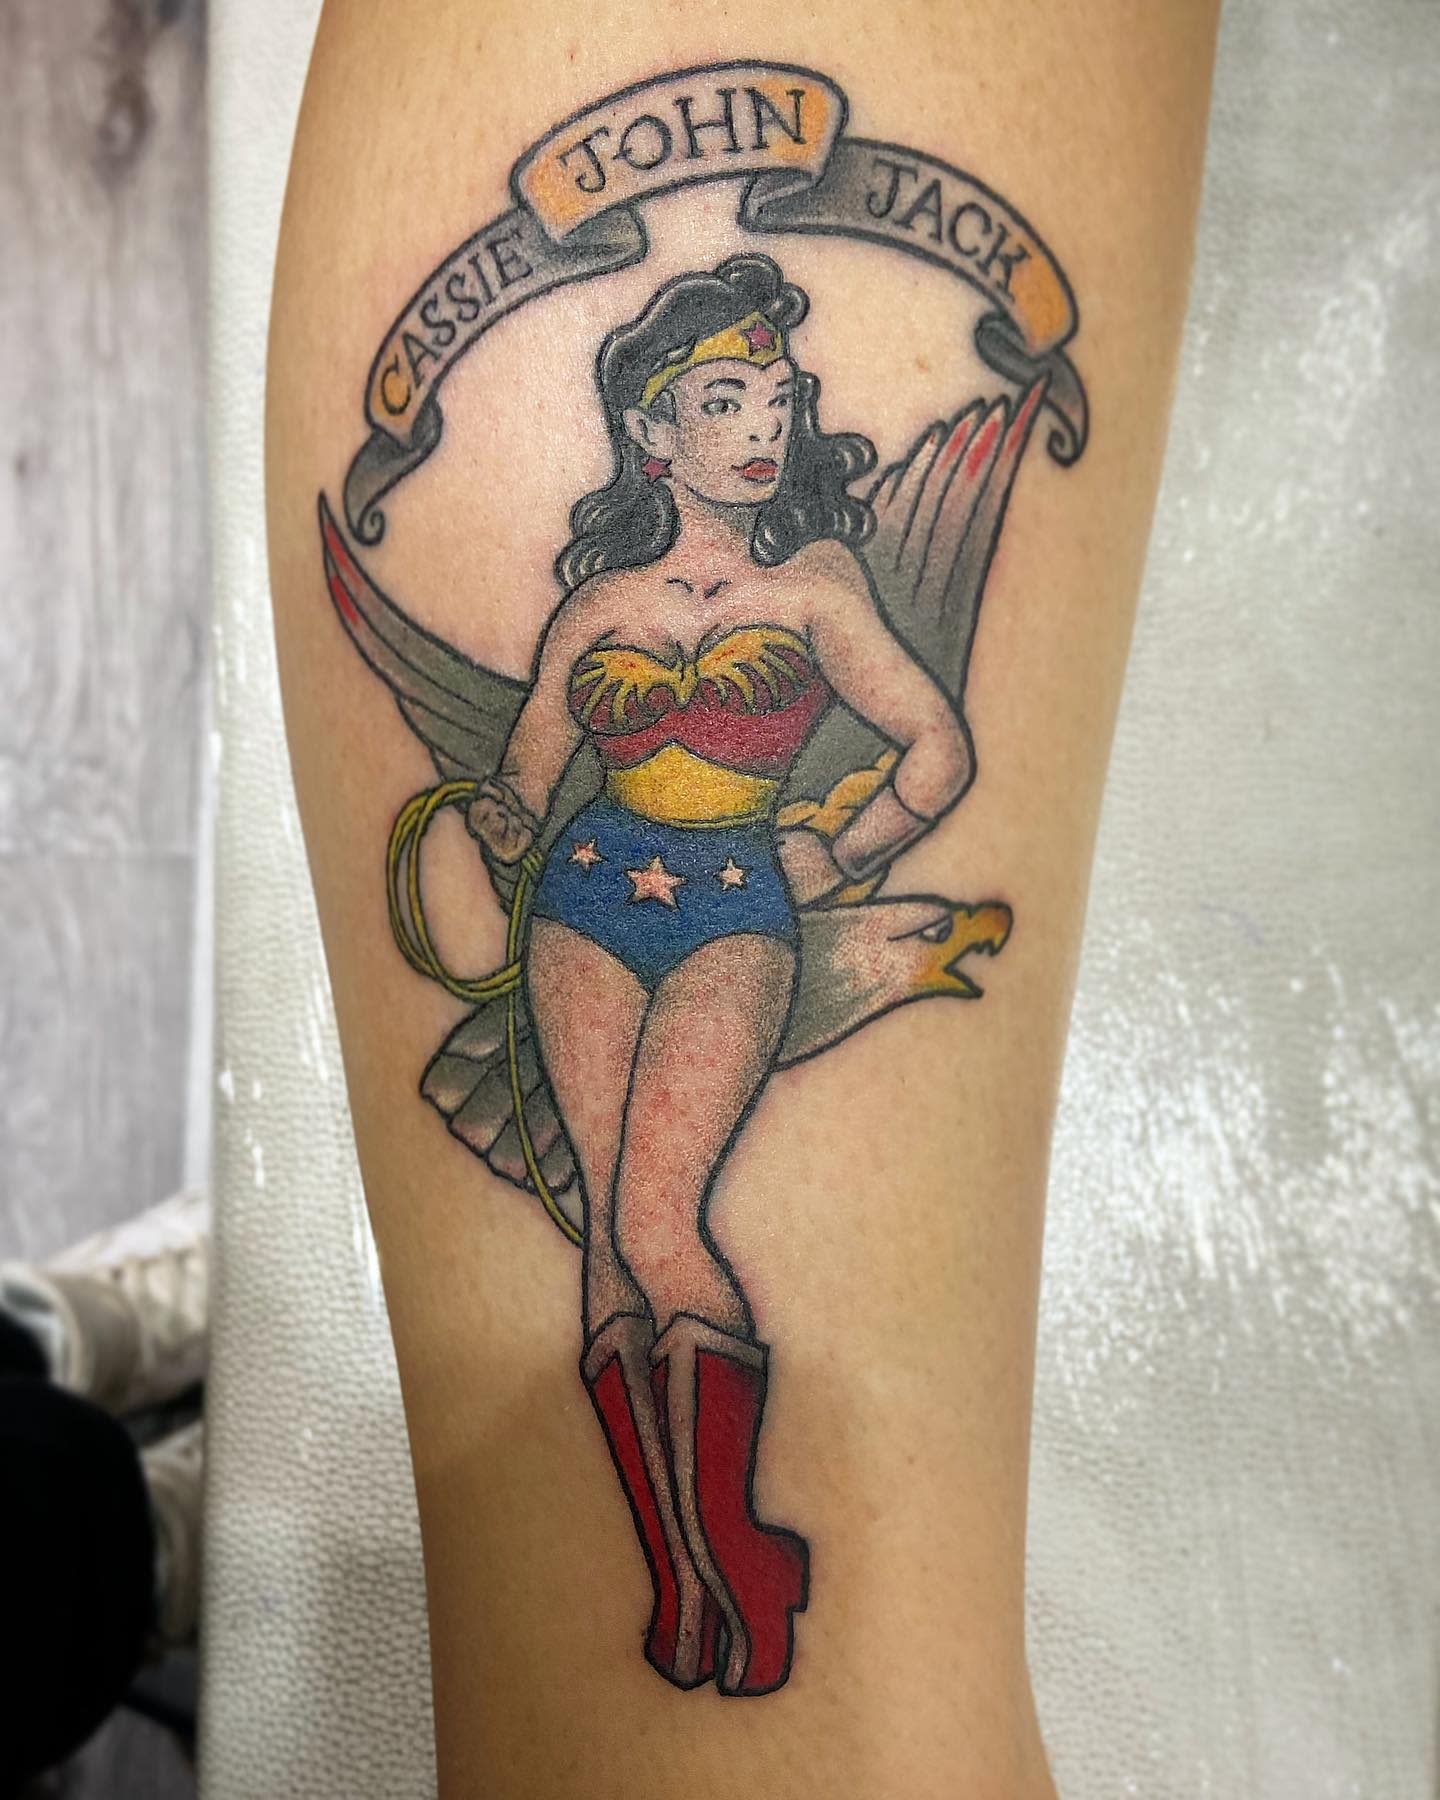 Pin by Jessica CachoKirkwood on Tattoos By Jessica Kirkwood  Wonder woman  tattoo Tattoos Tattoos for women